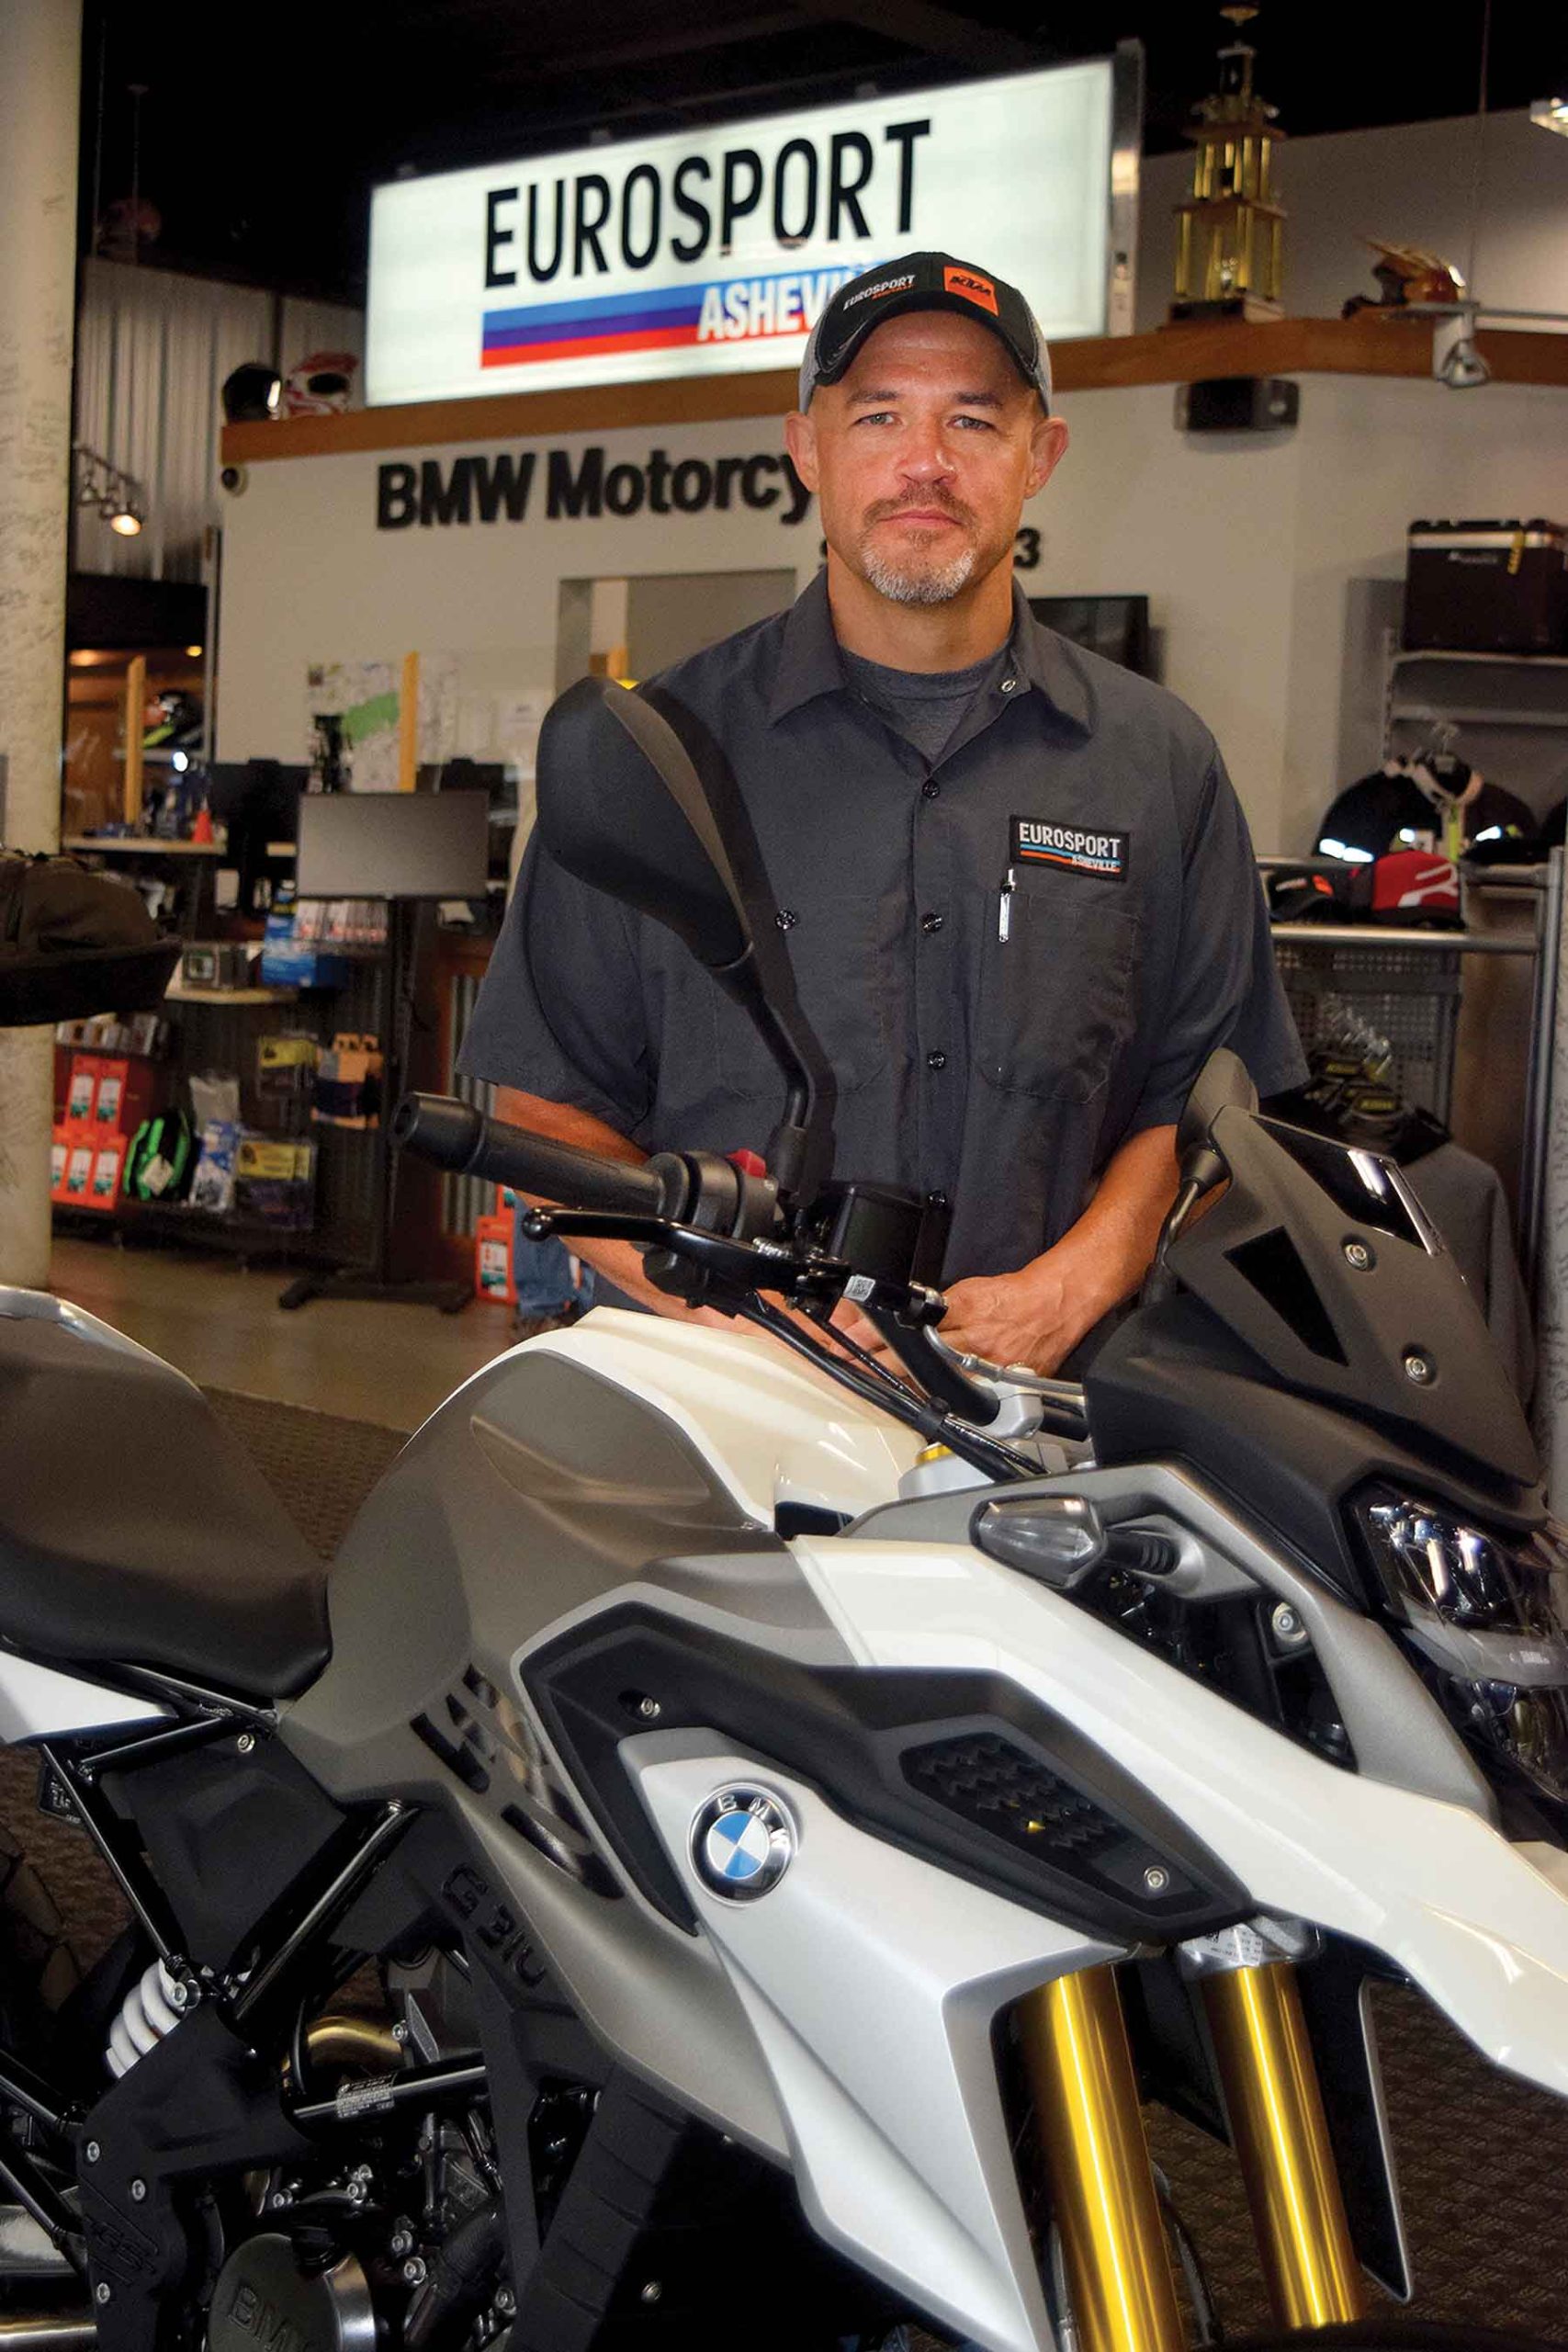 Eurosport Asheville owner Thomas Montgomery stands in a showroom beside a silver BMW motorcycle